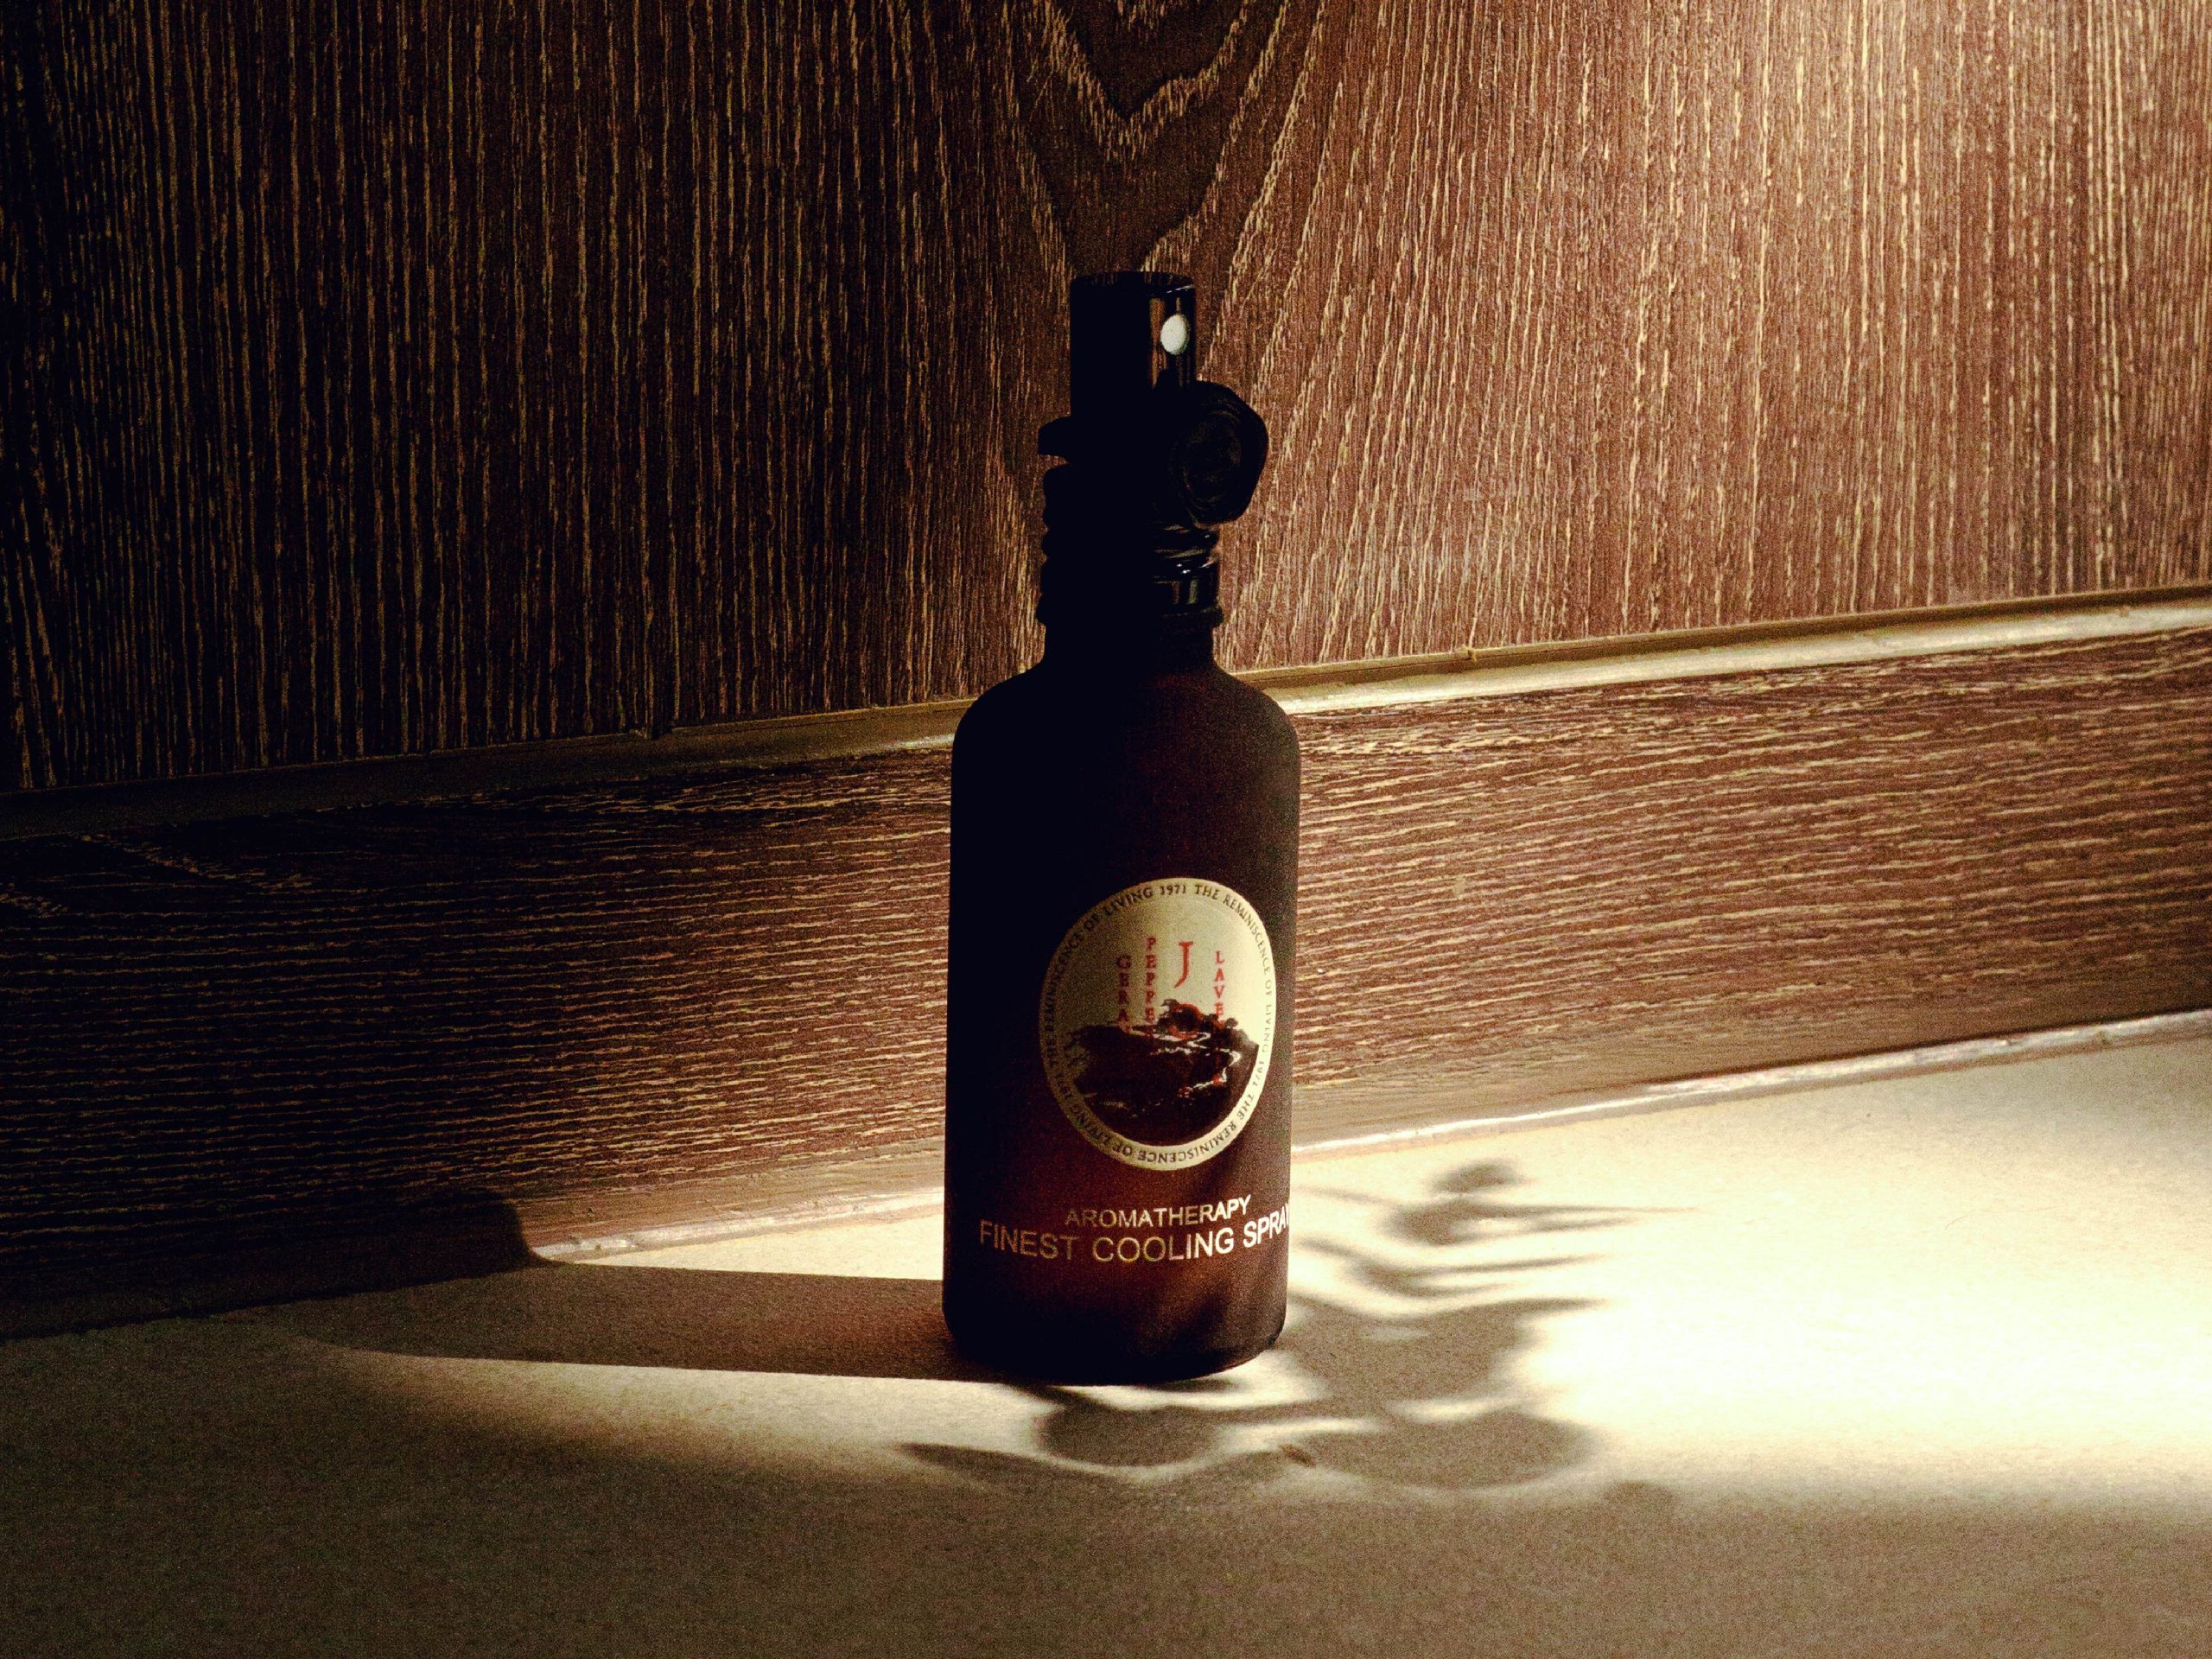 AROMATHERAPY FINEST COOLING SPRAY